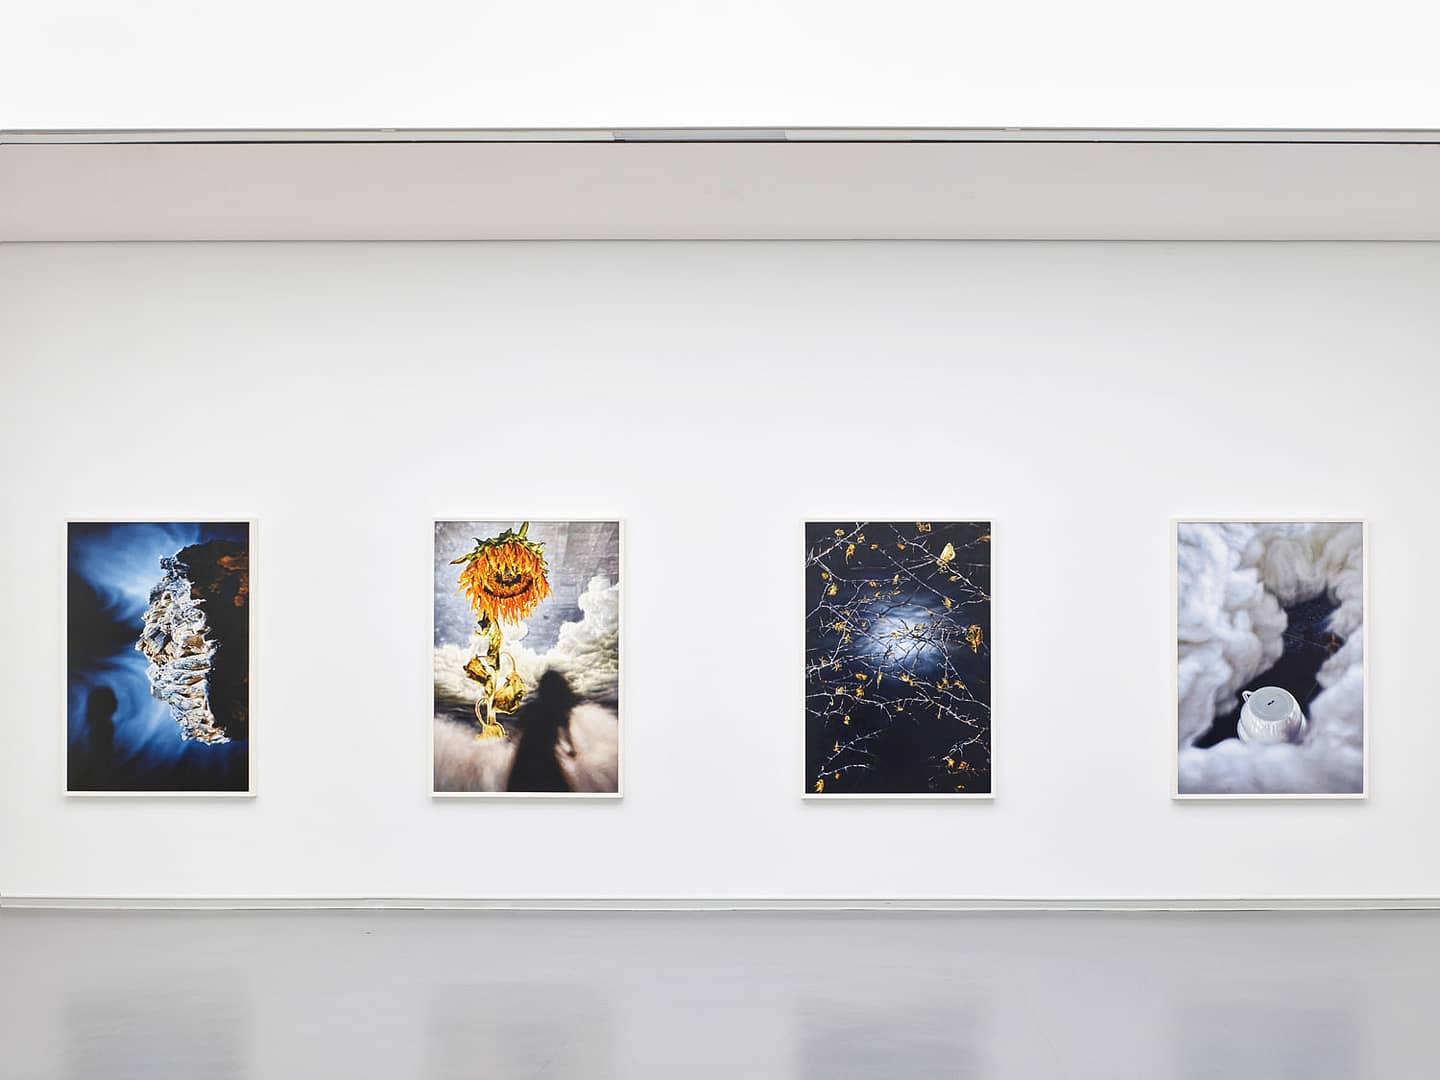 Exhibition view of Philipp Fröhlich's solo show Märchen at Von der Heydt Kunsthalle Barmen, produced by Kunst- und Museumsverein Wuppertal. The image shows four paintings based on a short fairy tale found in the fragment of "Woyzeck" by Georg Büchner.